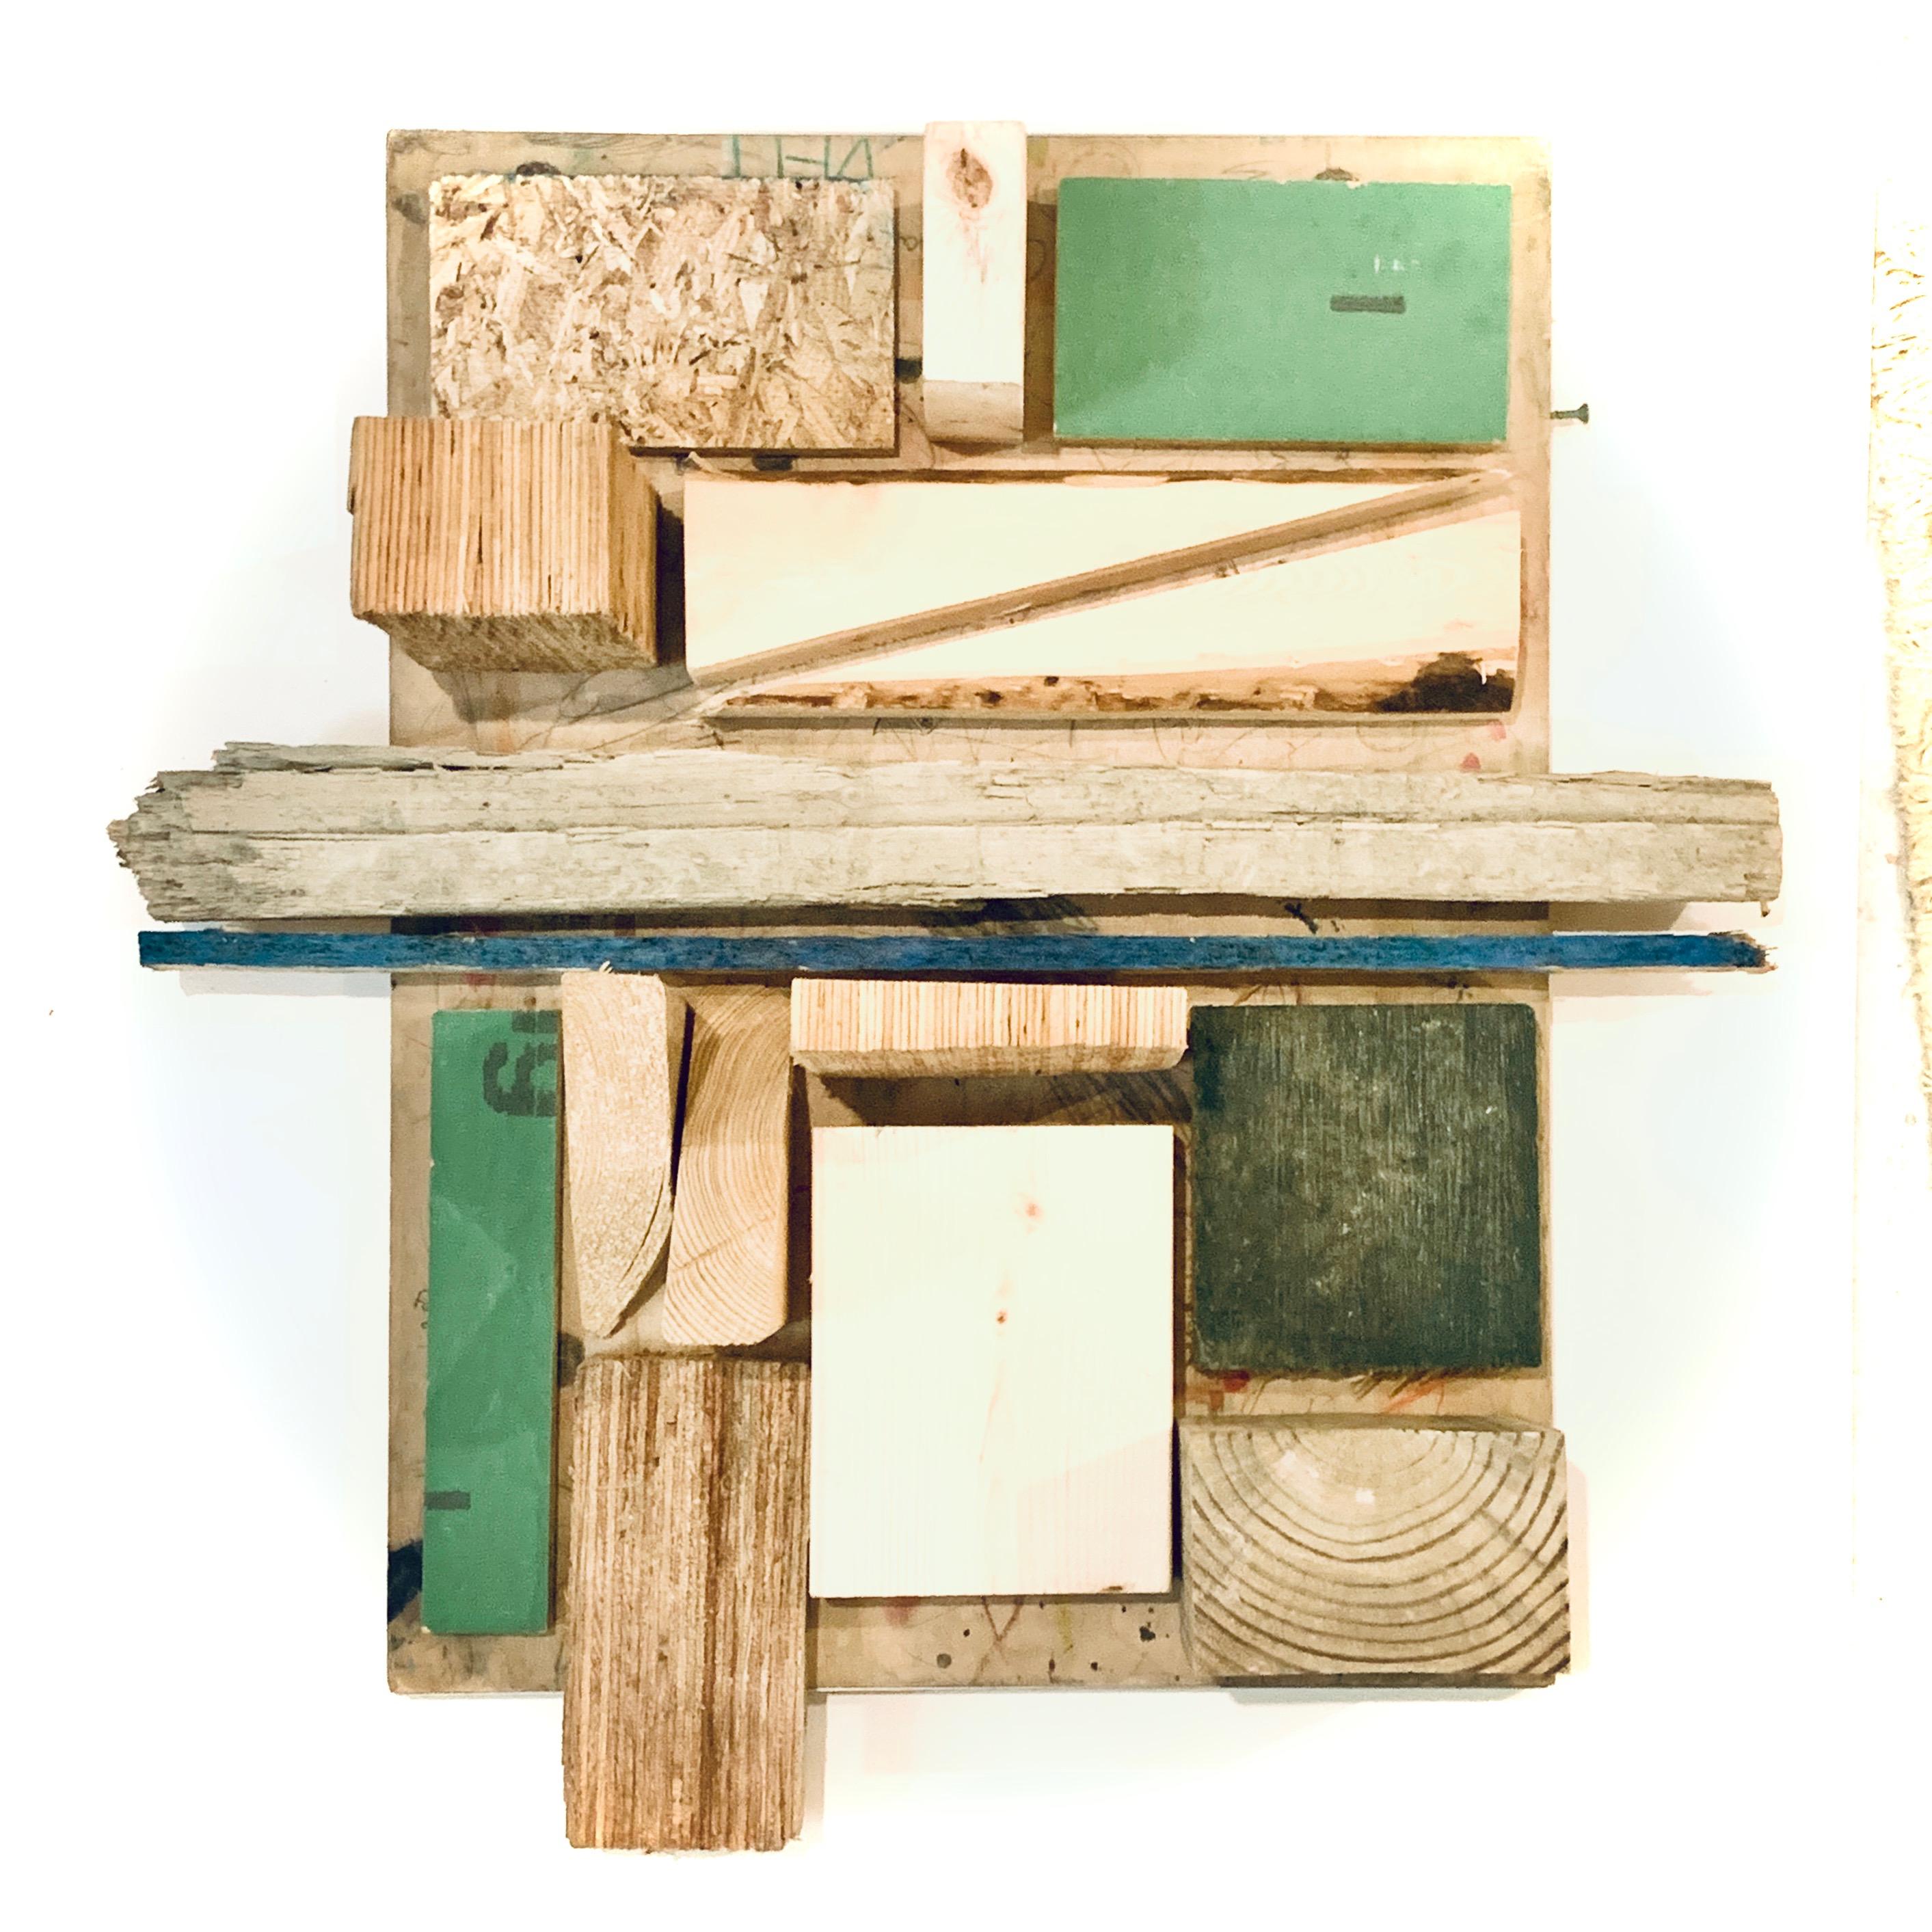 Hand-Crafted Incredible Wall Hanging Sculpture/ Assemblage / Wood Collage by Judy Engel, 2020